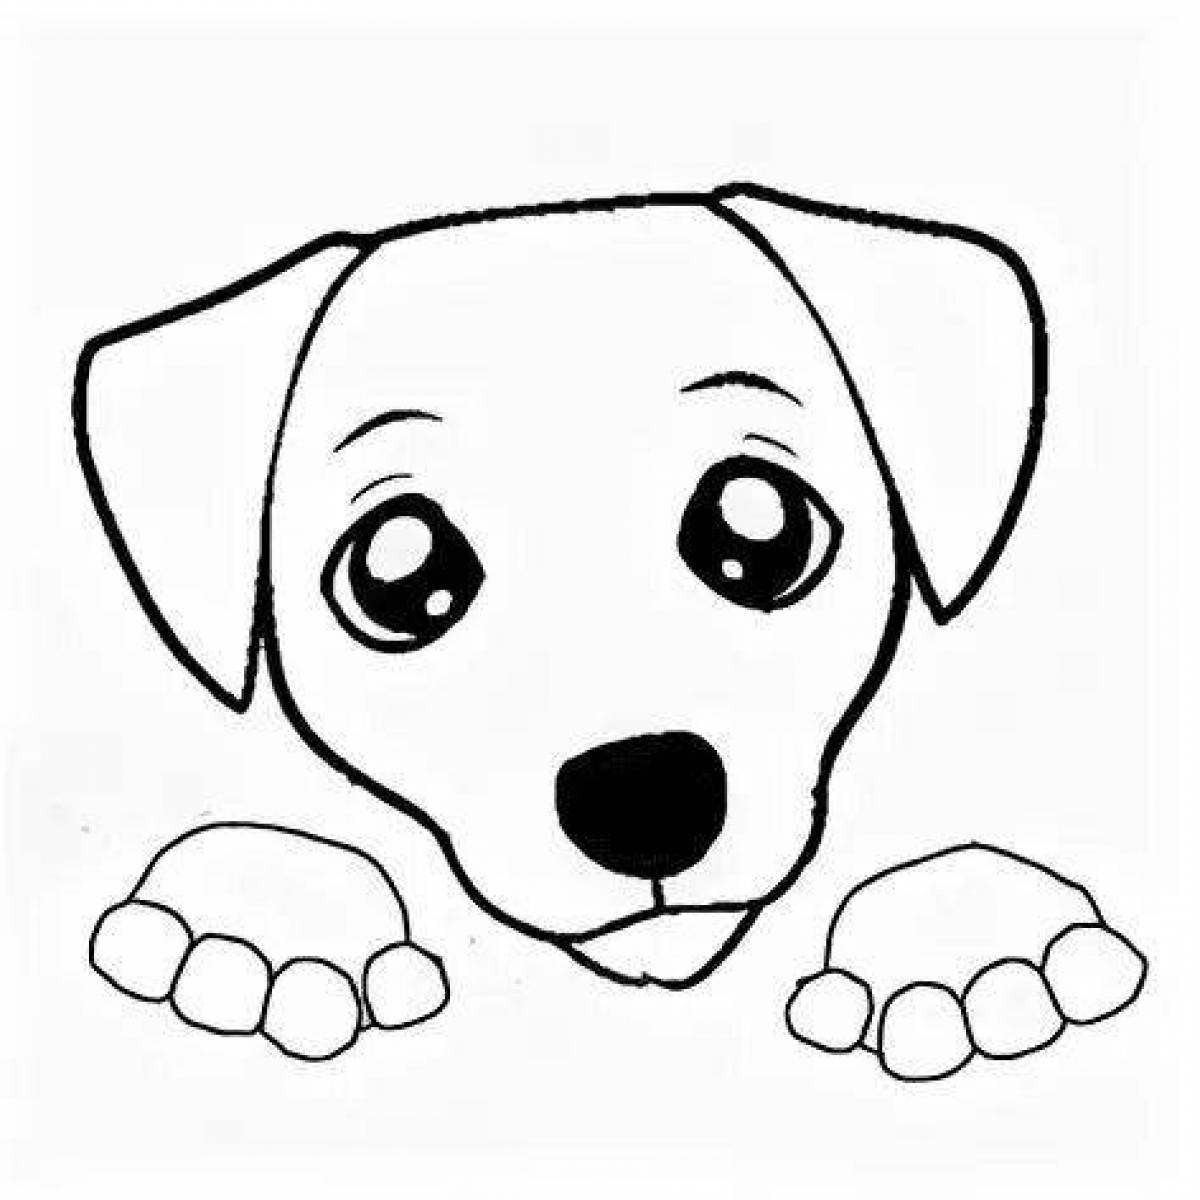 Coloring page cheeky jack russell